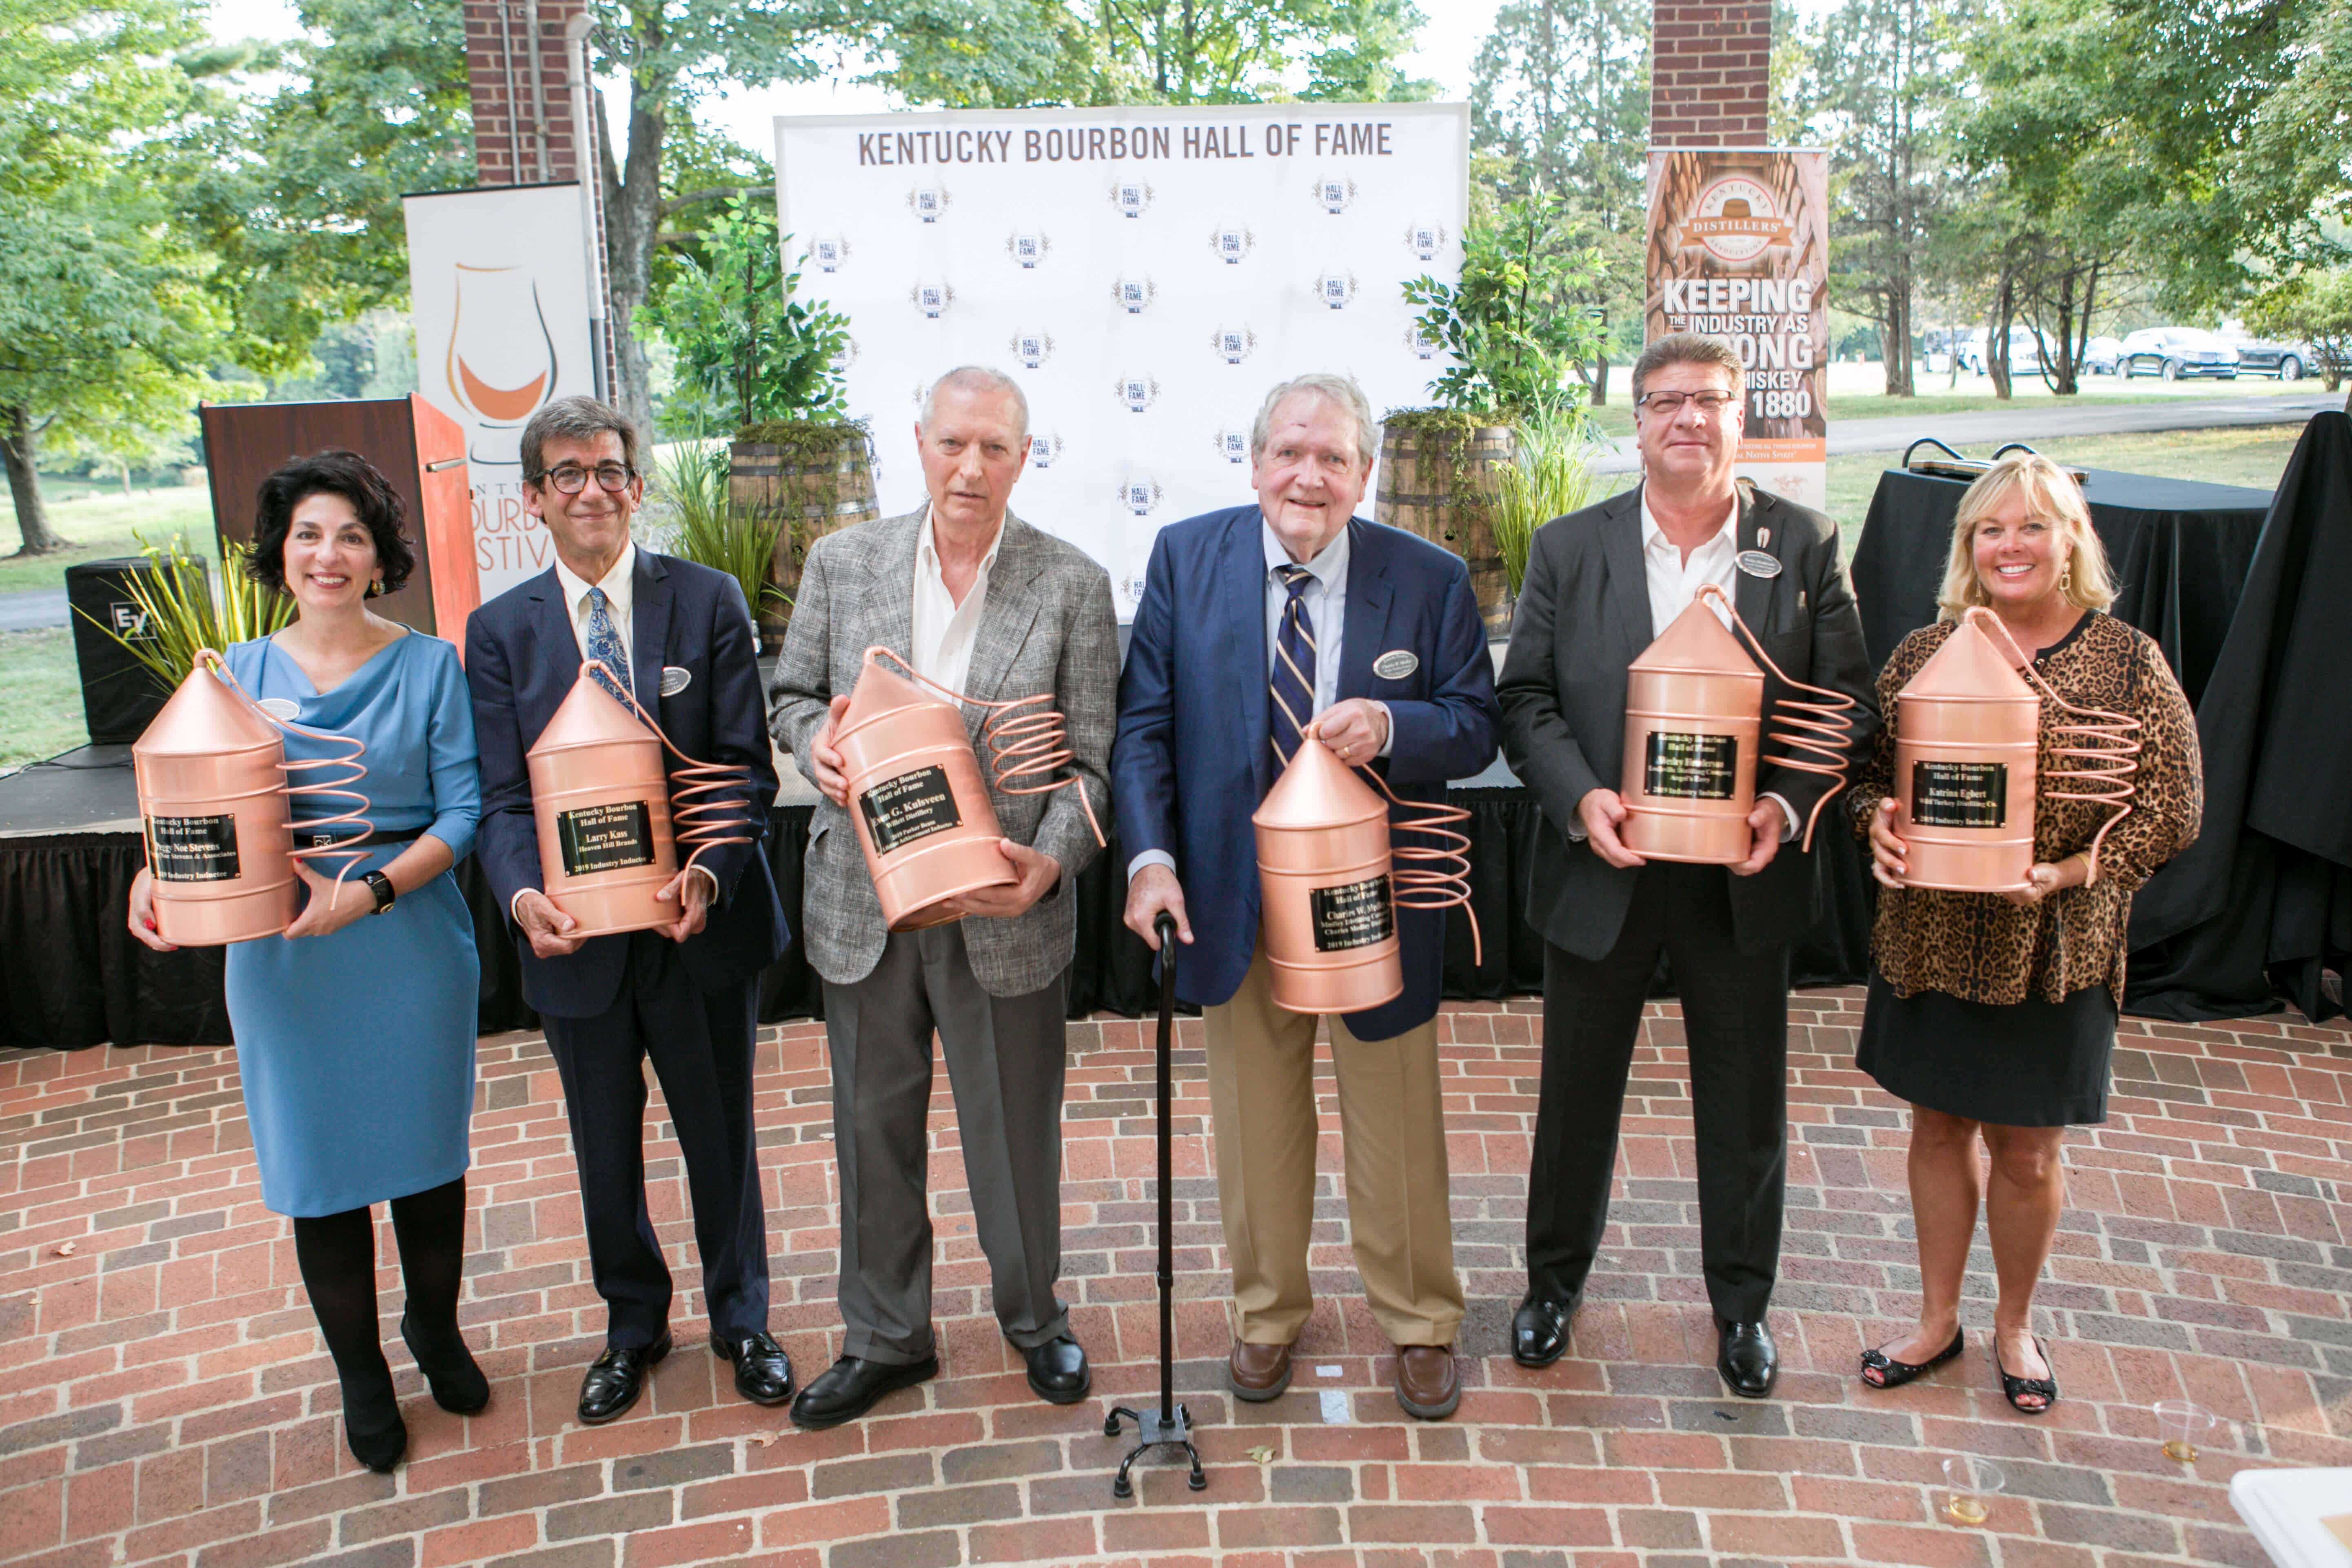 image1 2 - Kentucky Bourbon Hall of Fame Inducts Six New Members & Bestows Lifetime Achievement Award